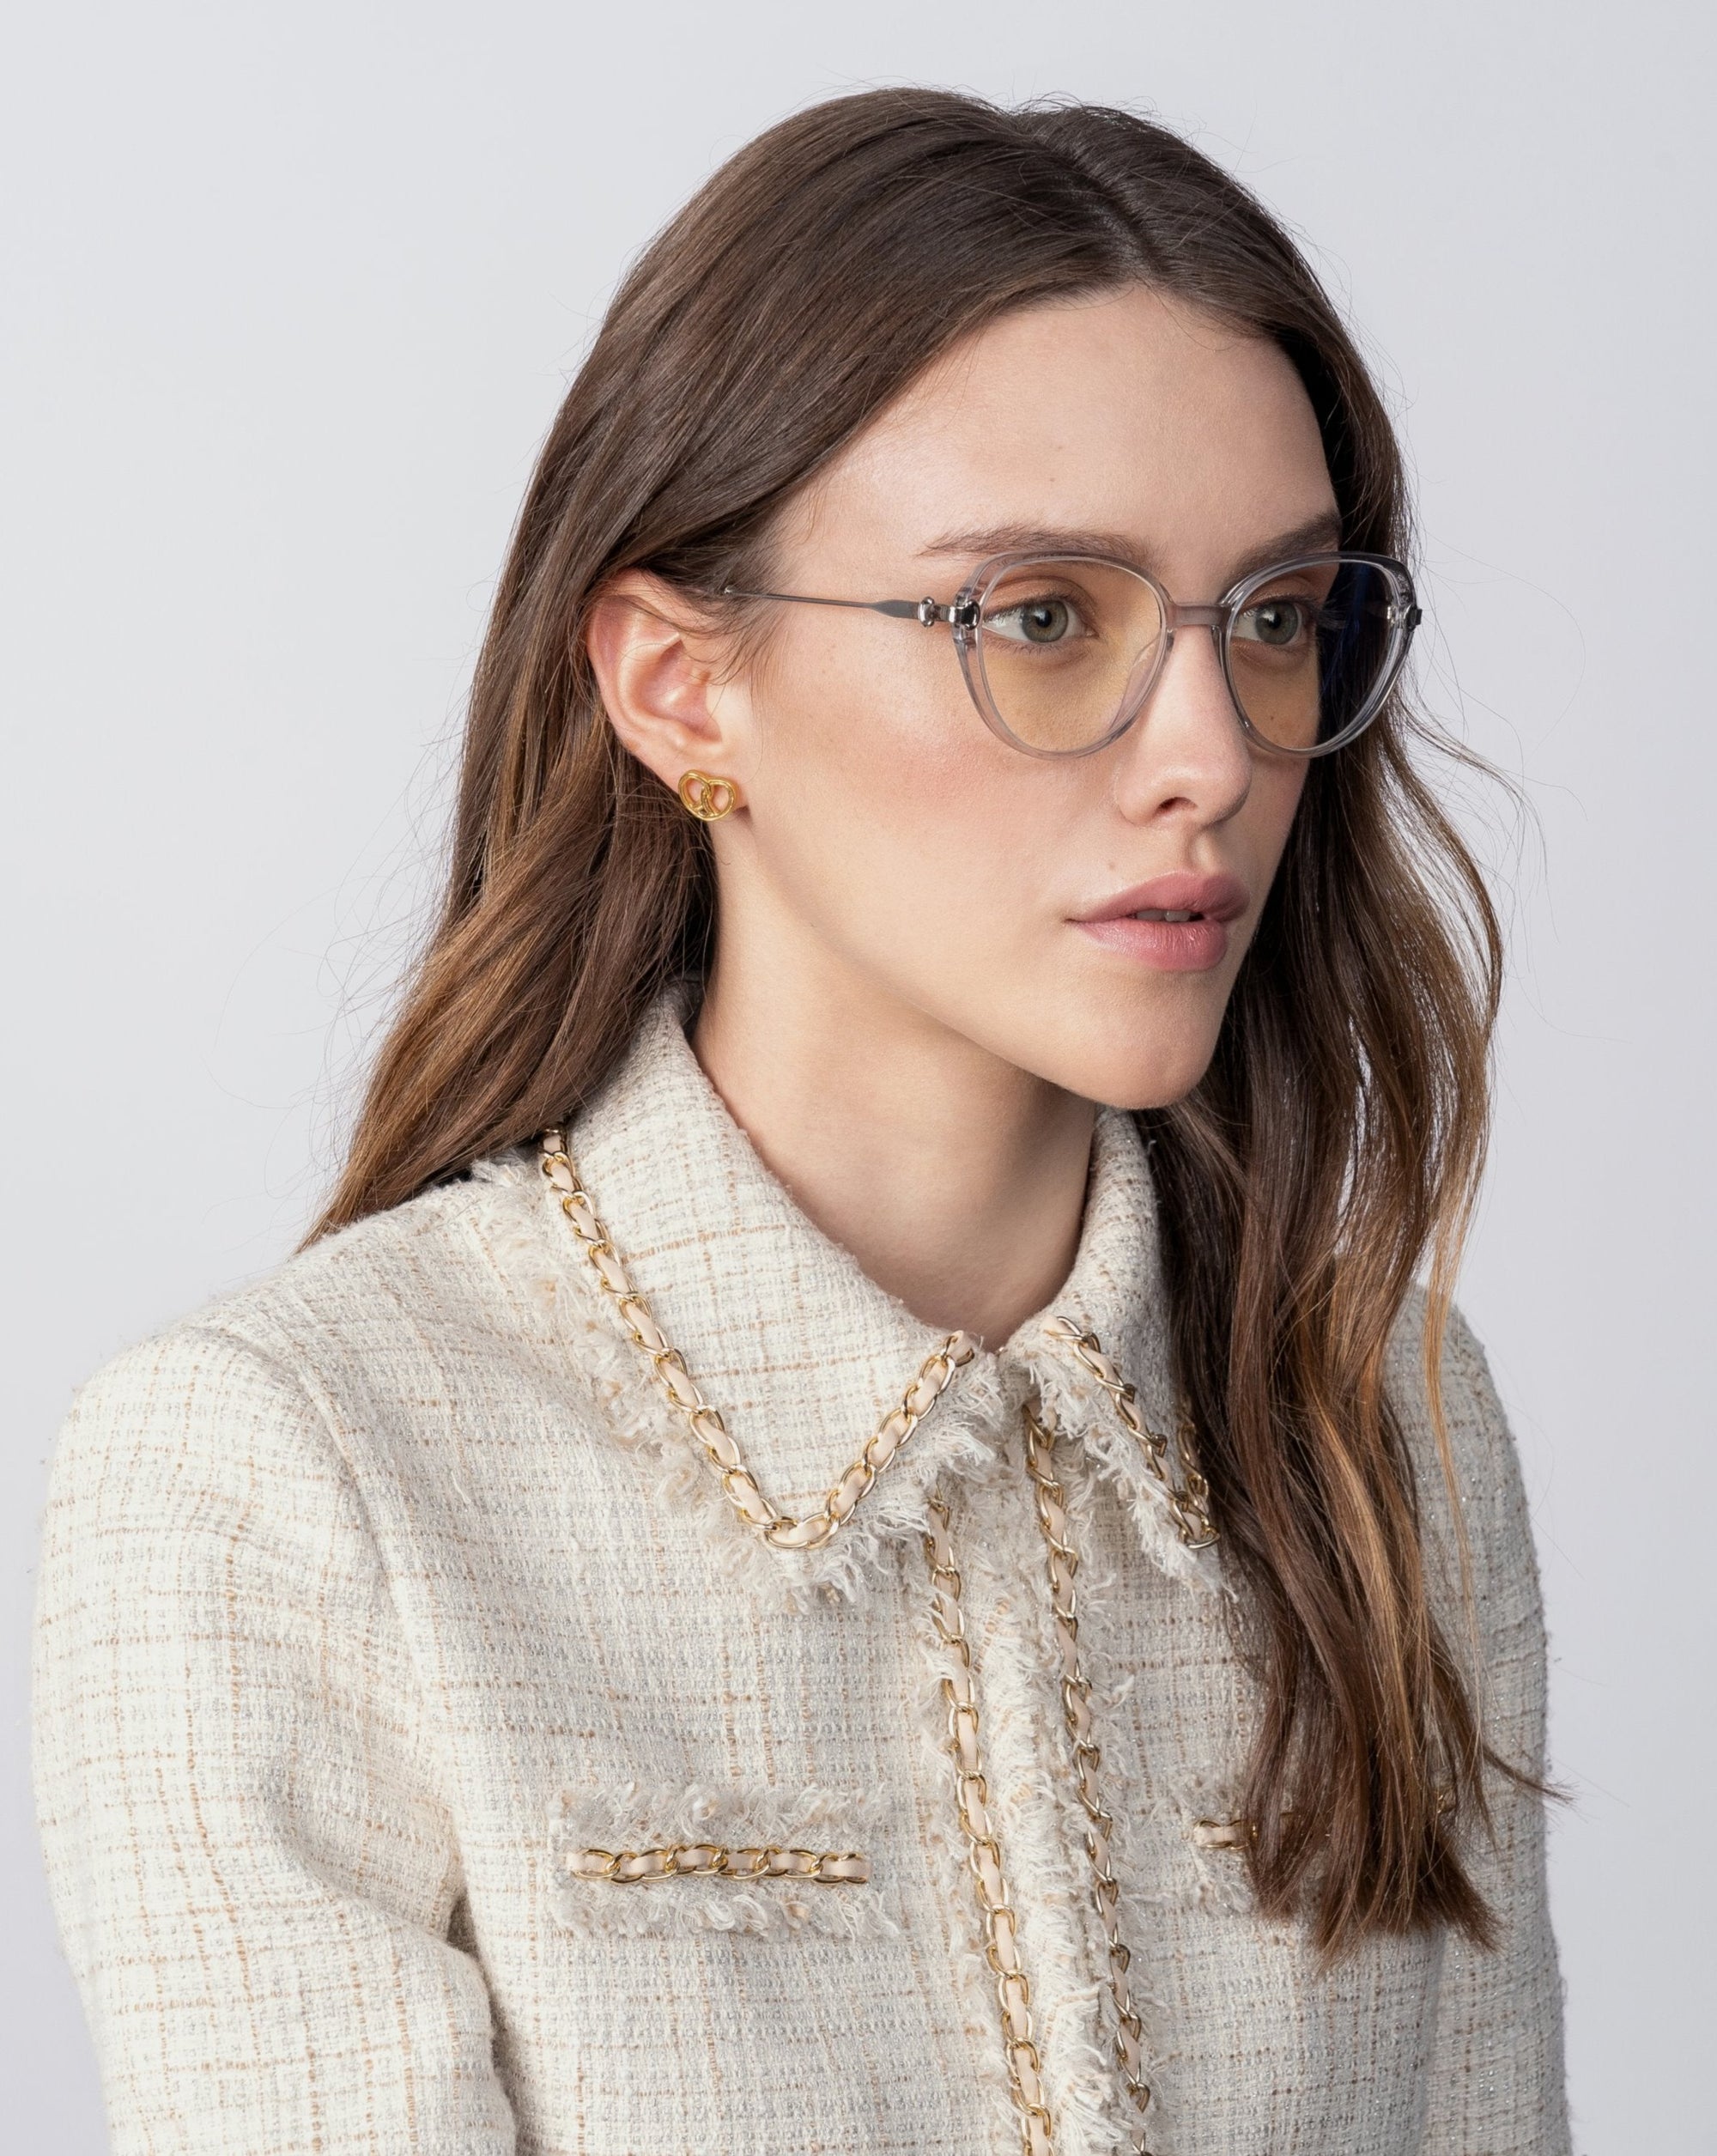 A woman with long, wavy brown hair is wearing rectangular eyeglasses called Waterhouse by For Art&#39;s Sake® with prescription lenses and gold earrings. She is dressed in a cream-colored, textured jacket with decorative trim. She gazes slightly to the right against a plain, light background.